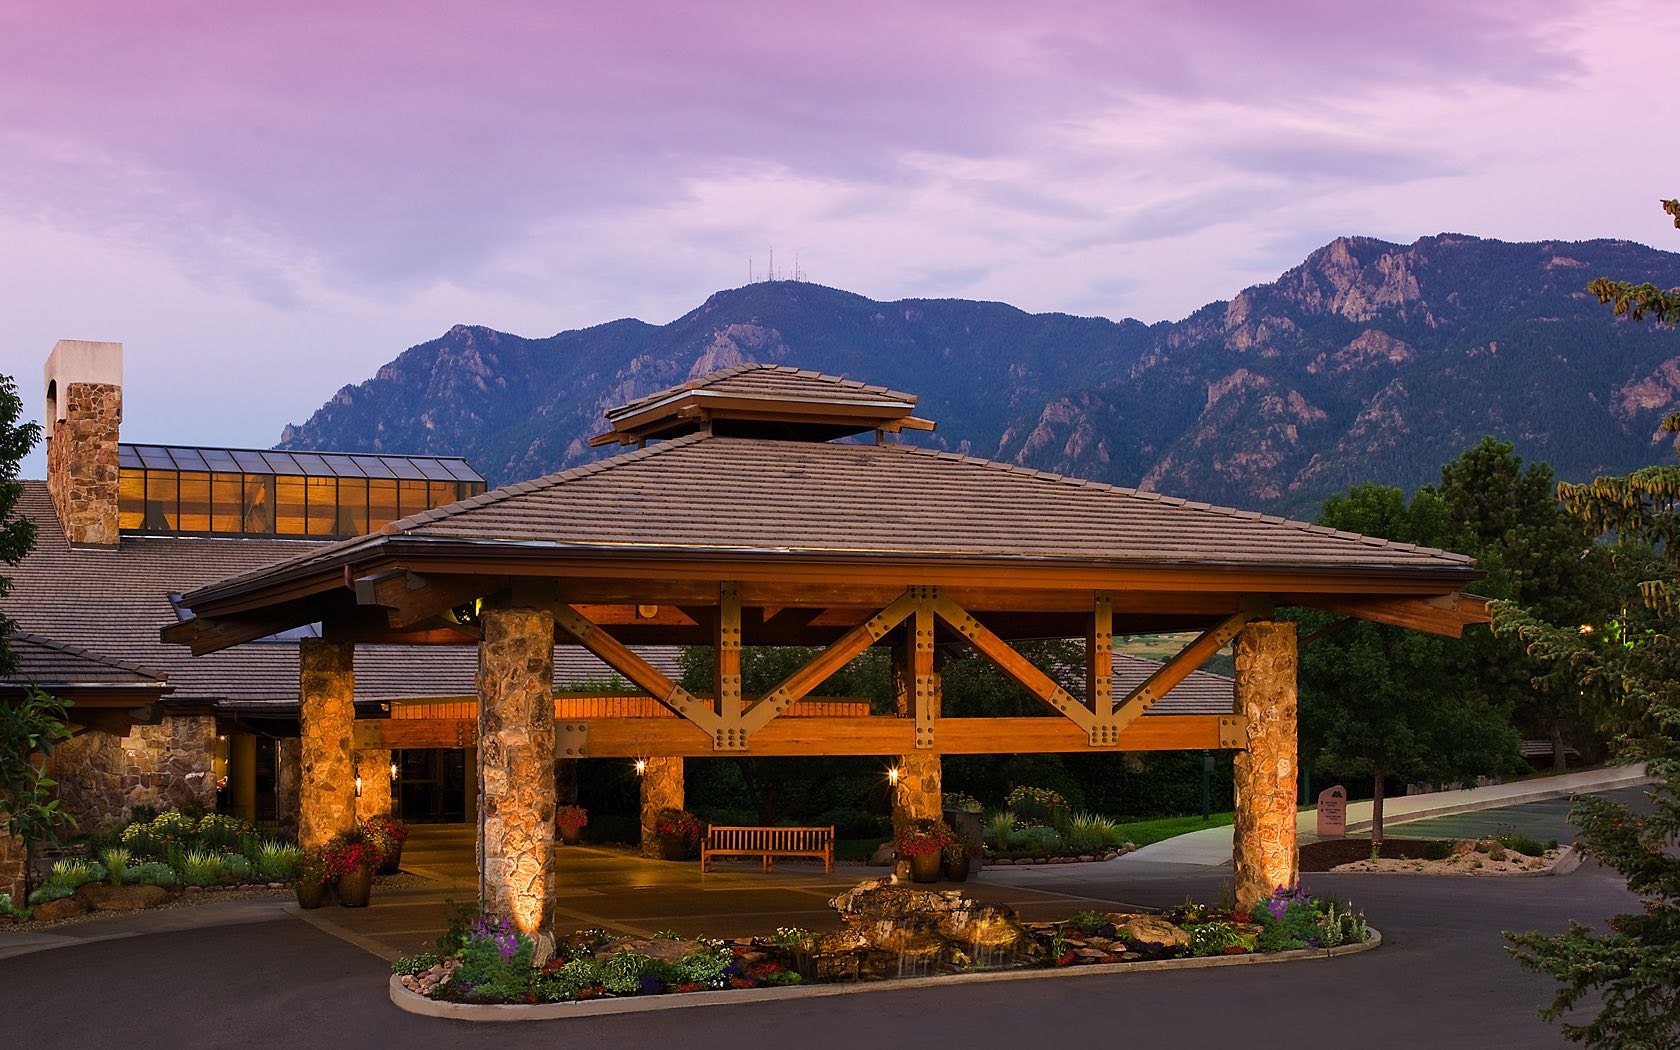 13 of the Best Colorado Springs Resorts & Hotels for Families – The Family Vacation Guide